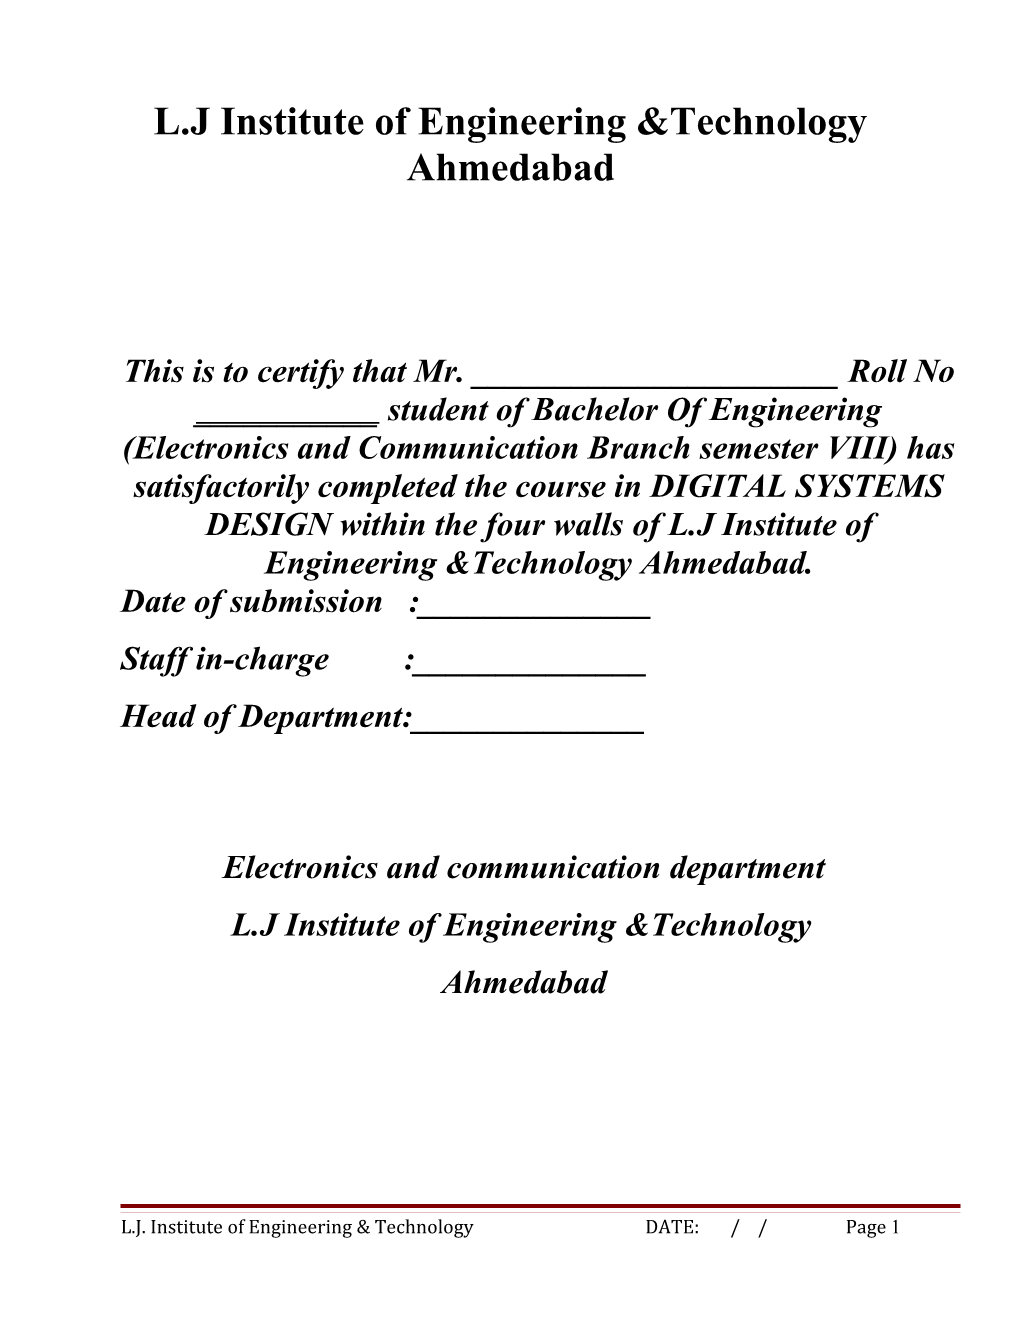 This Is to Certify That Mr. ______ Roll No ______ Student of Bachelor of Engineering